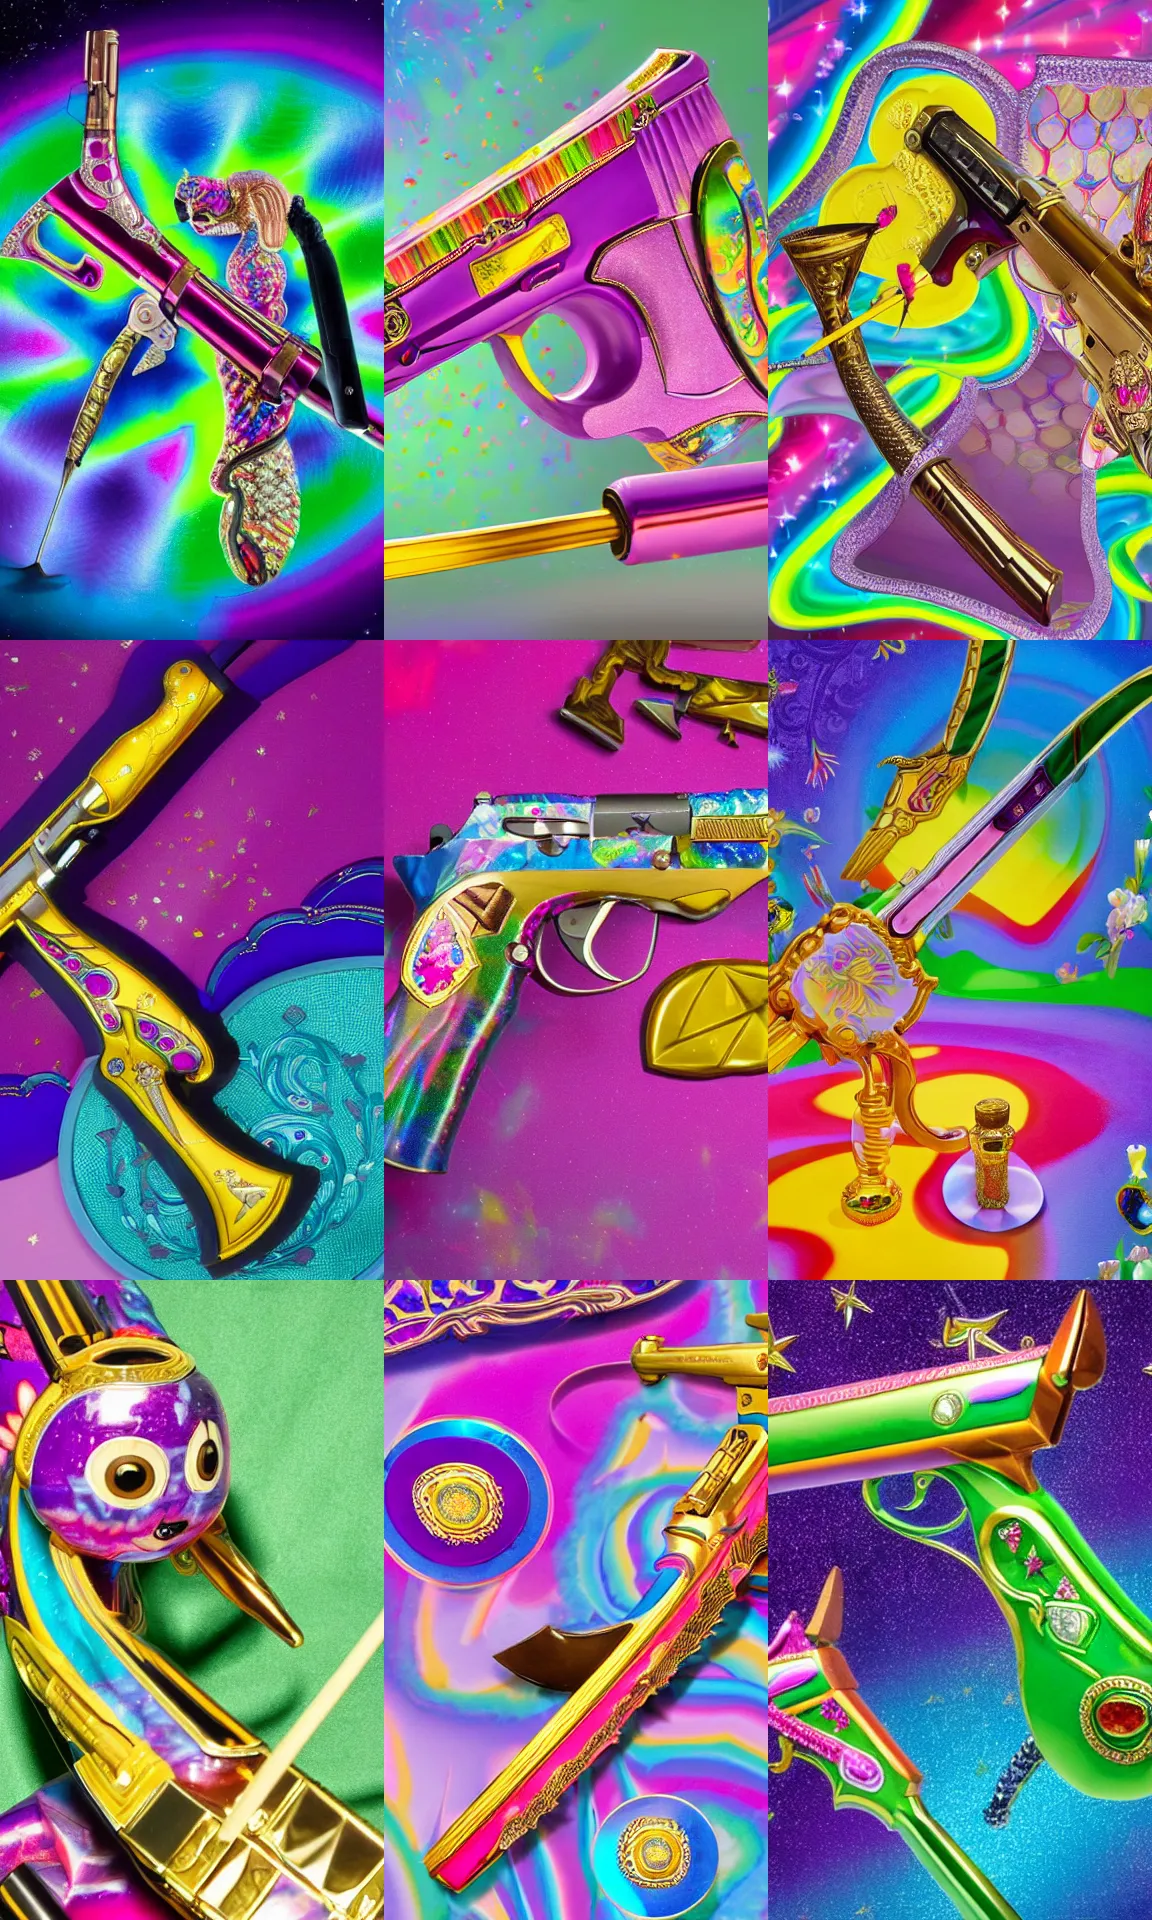 Prompt: legendary ranged weapon designed by Lisa Frank in collaboration with The House of Fabergé, high resolution auction photo